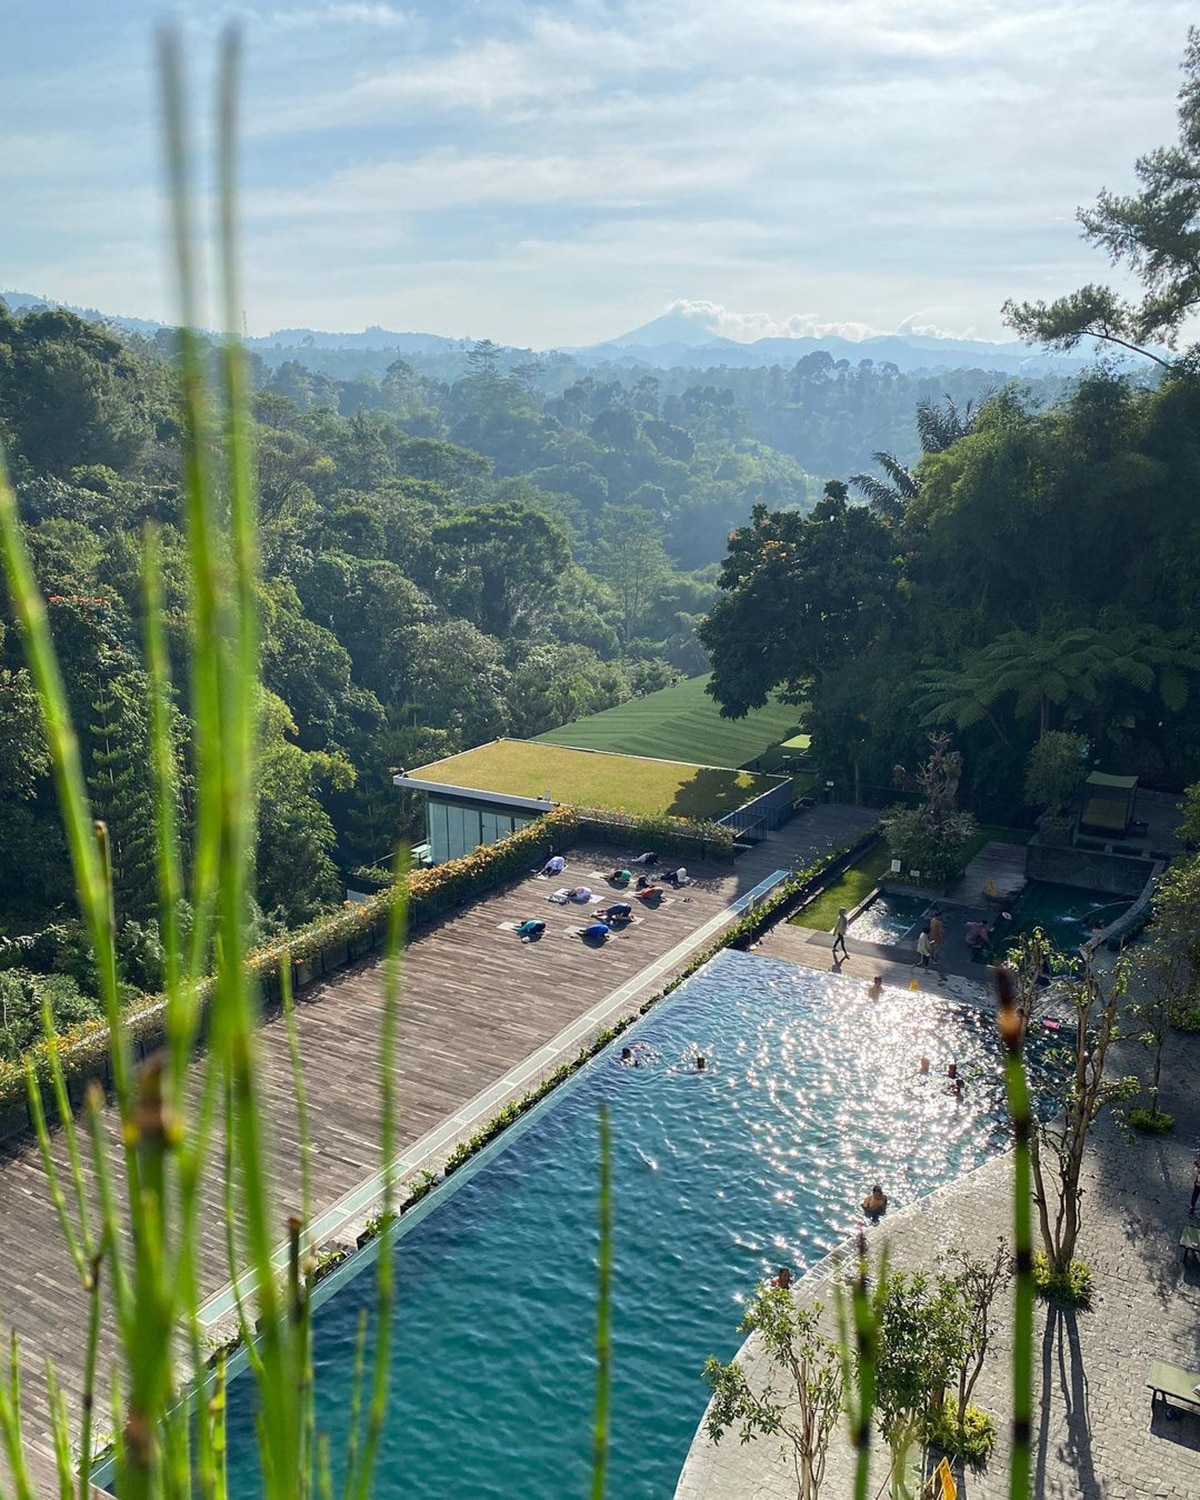 15 Best Hotels for Your Precious Family Moments in Indonesia